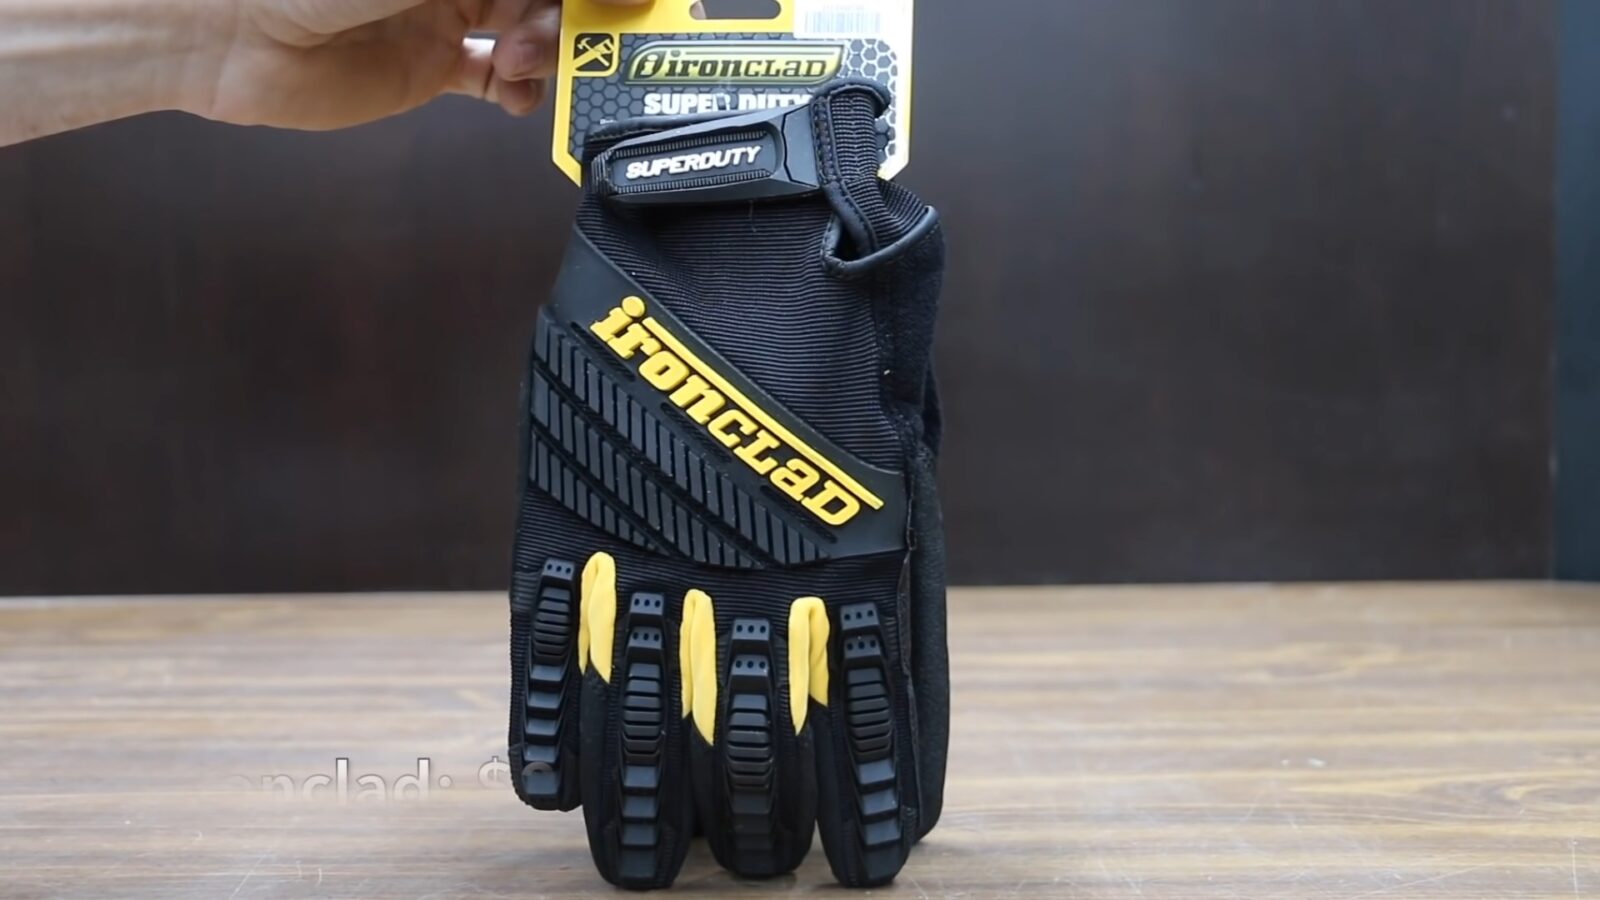 Best Gloves Ironclad for woodworking